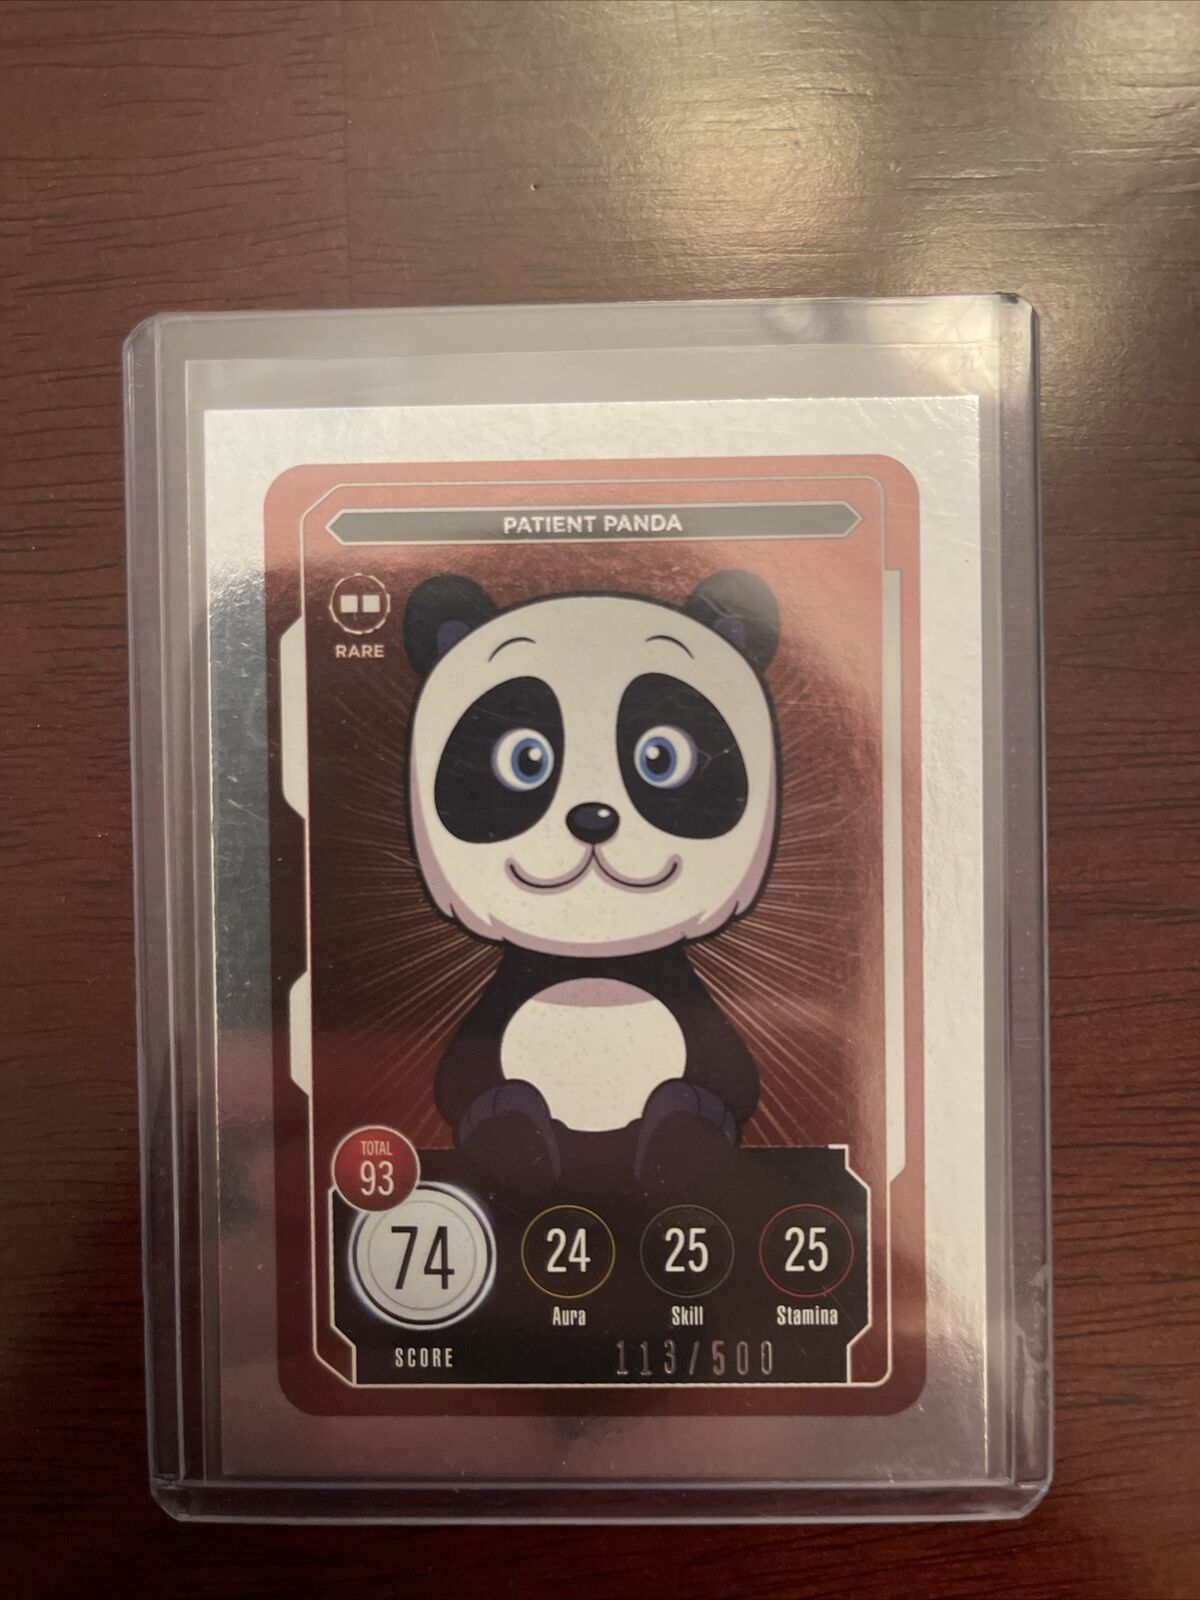 Veefriends Series 2 Compete and Collect Rare Patient Panda /500